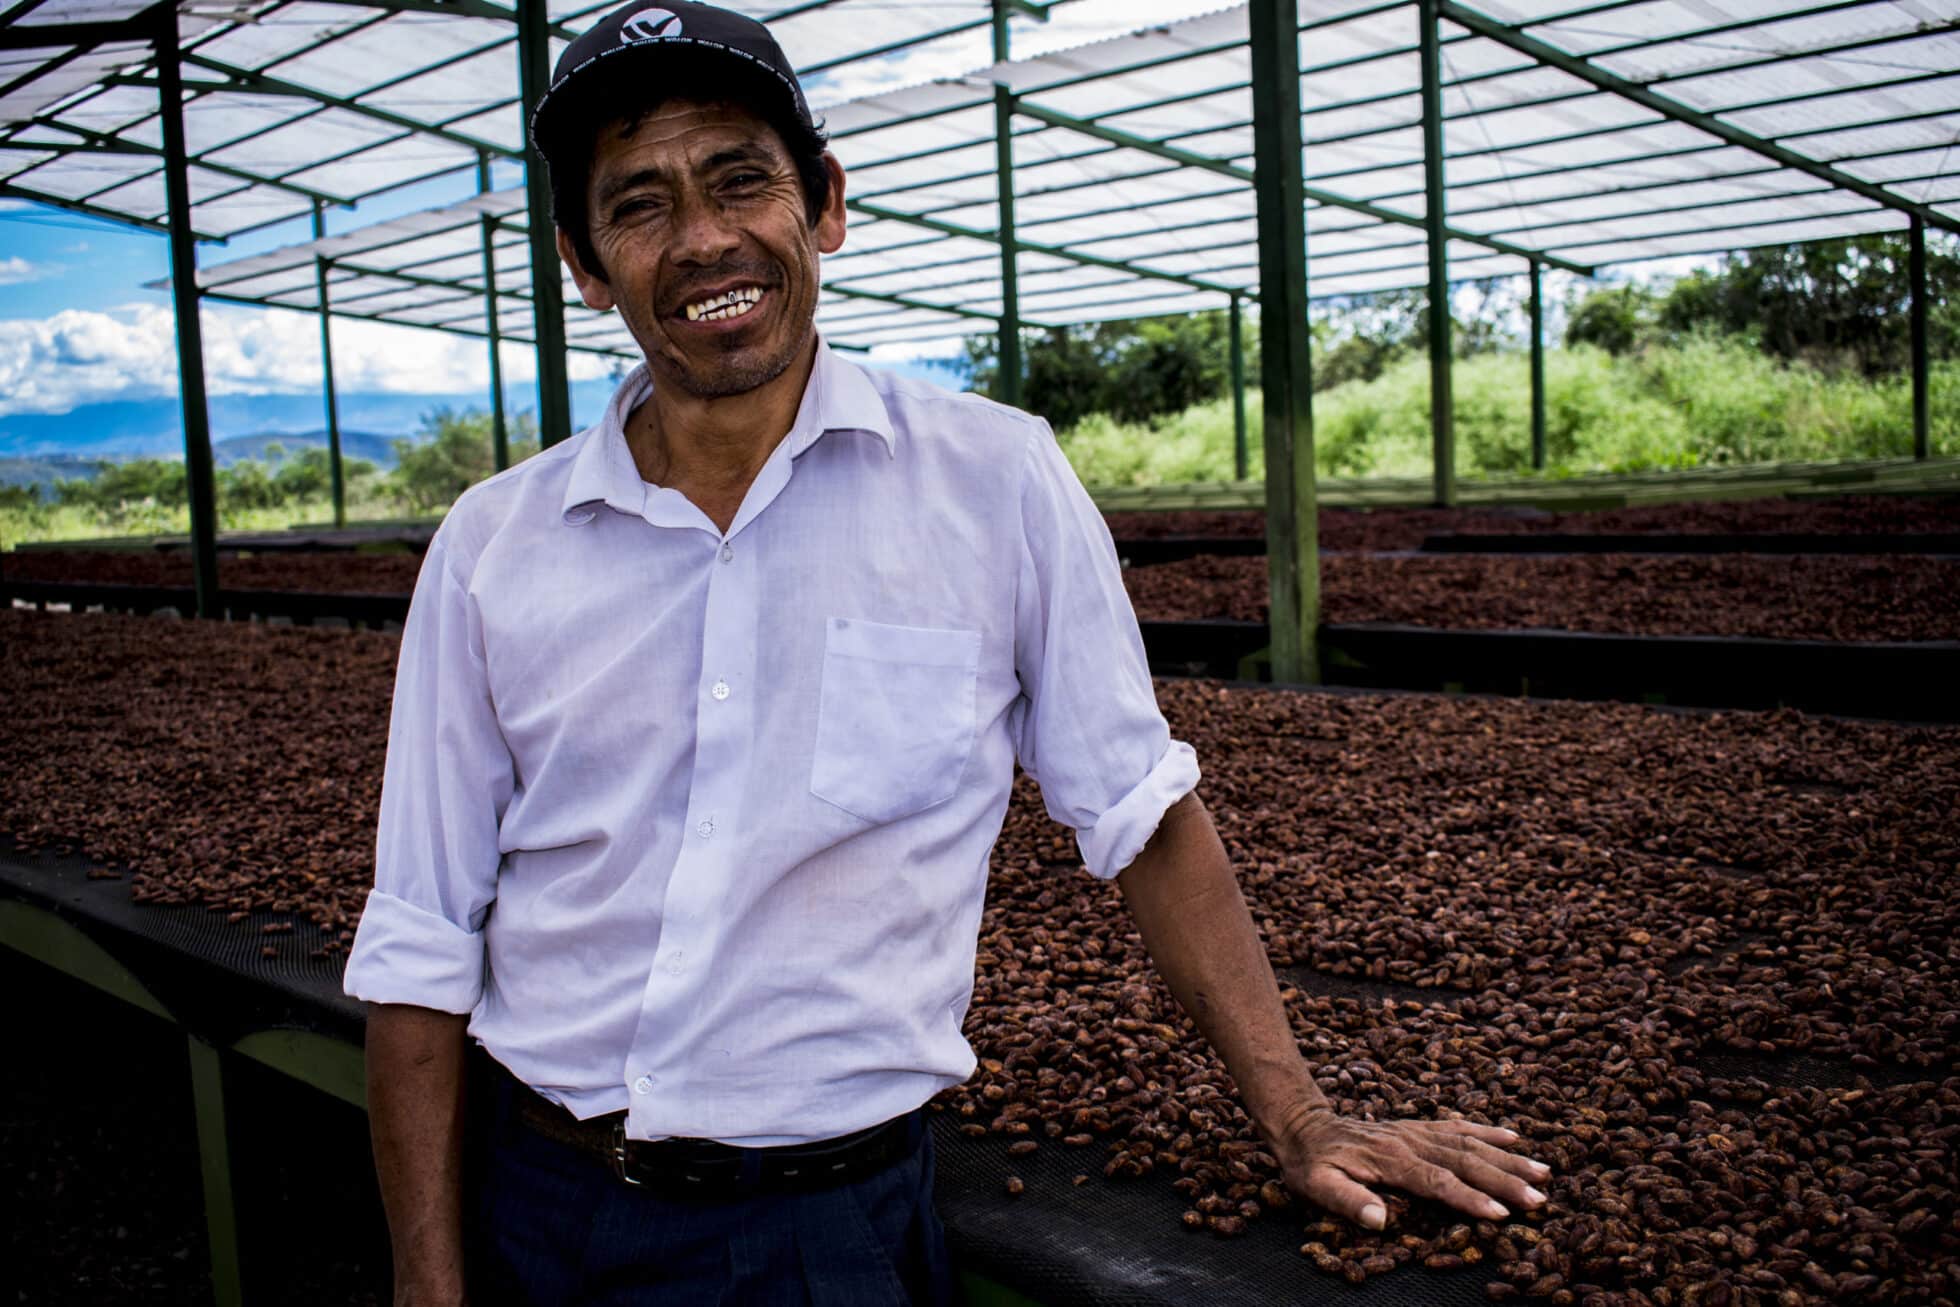 Evaluating How Root Capital’s Client Businesses Impact Smallholder Livelihoods: Cocoa Cooperatives in Peru